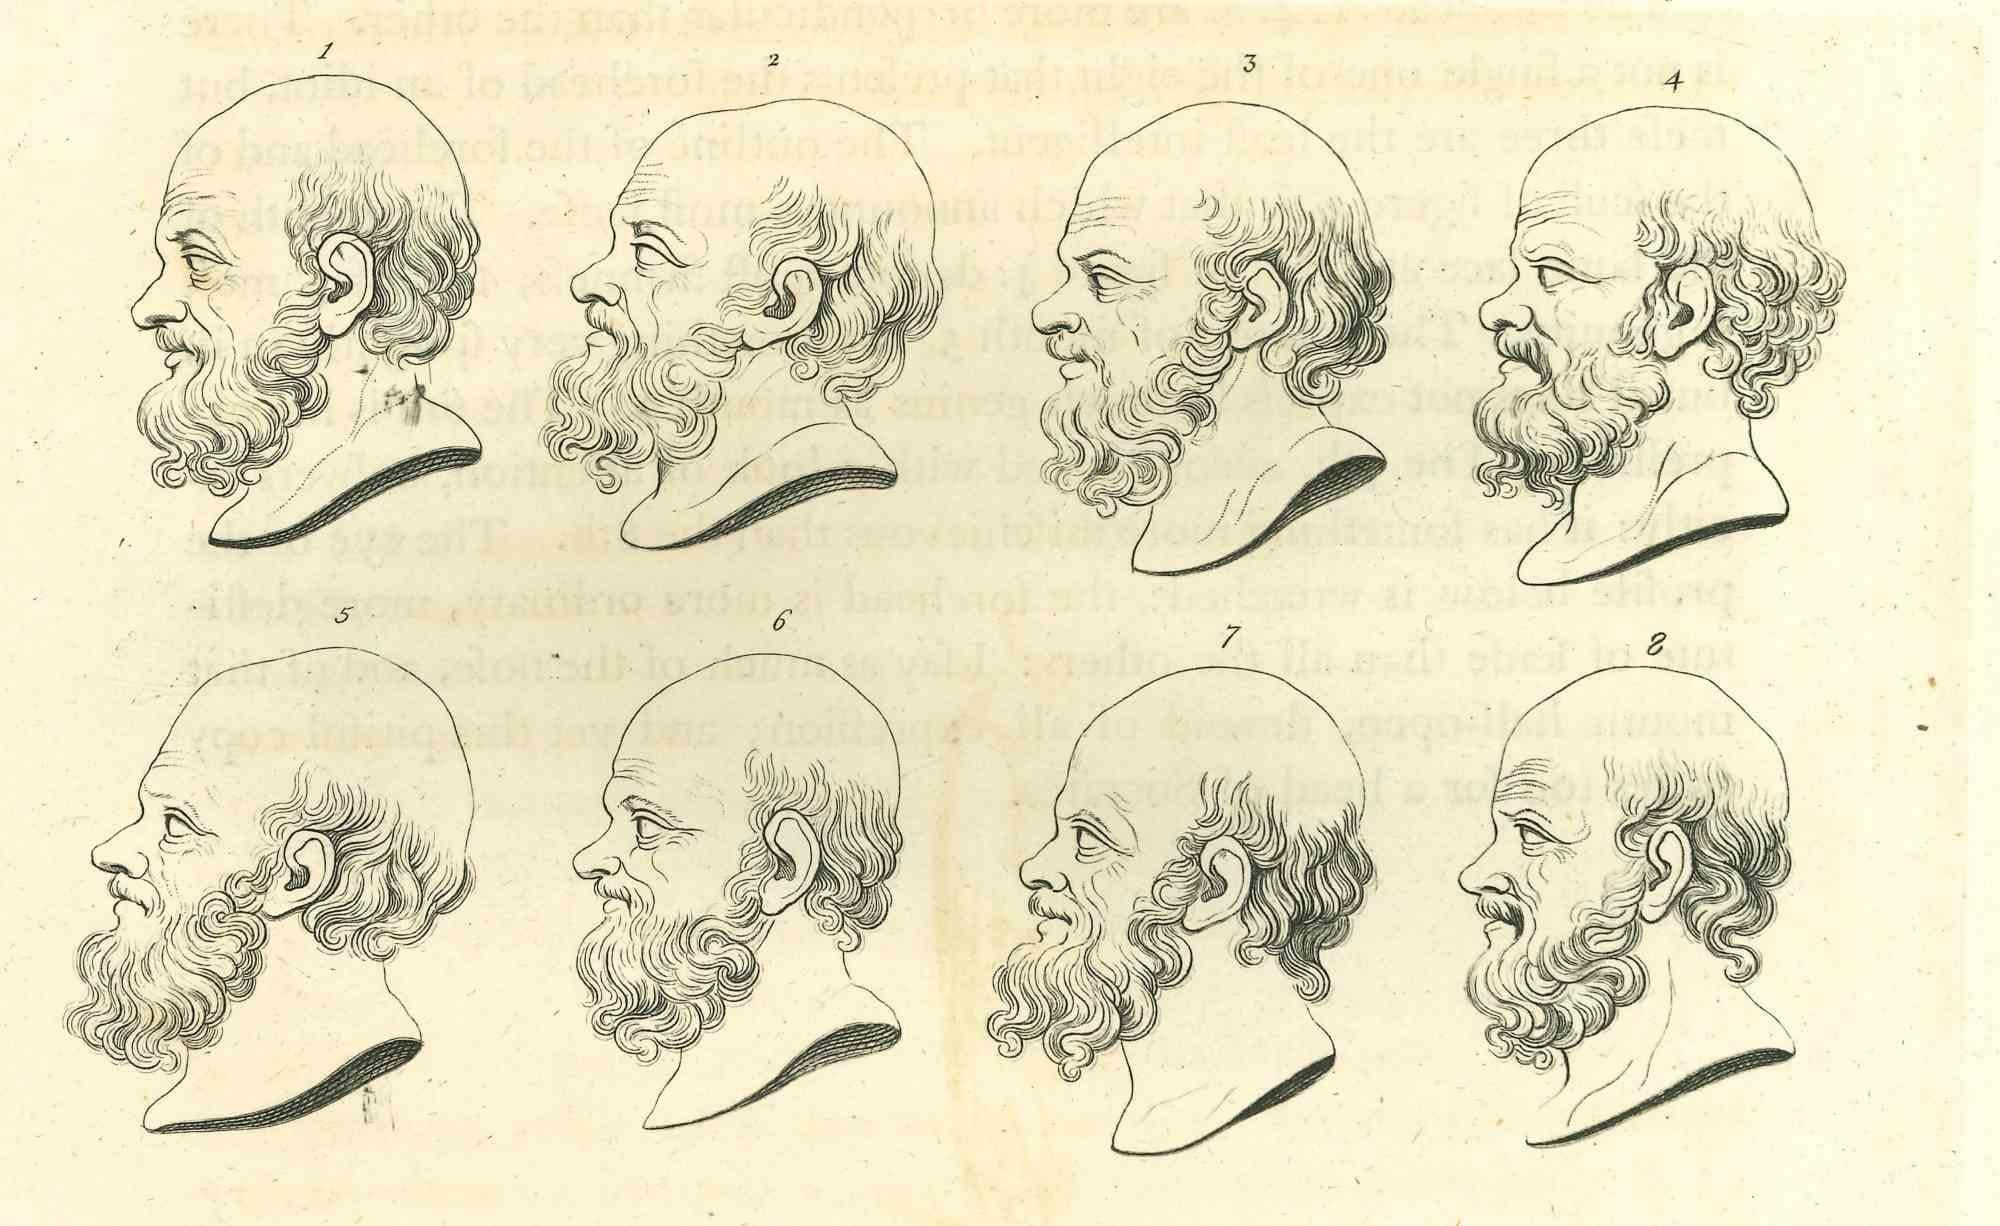 Heads of man is an original artwork realized by Thomas Holloway for Johann Caspar Lavater's  "Essays on Physiognomy, Designed to promote the Knowledge and the Love of Mankind", London, Bensley, 1810. 

 This artwork portrays heads of men. On the